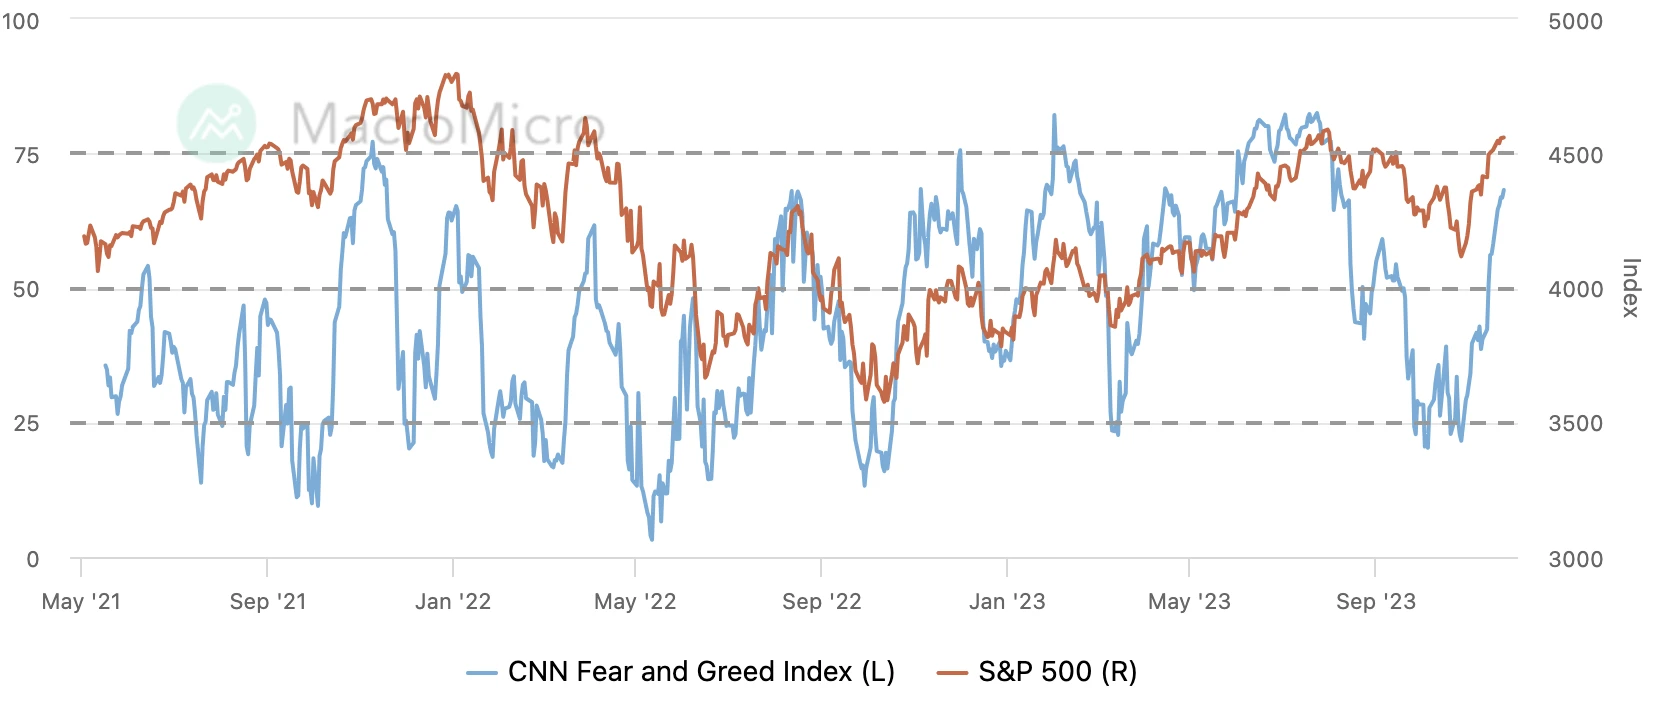 LD Capital Macro Weekly Report (11.27): Optimistic sentiment continues to cover positions, Goldman Sachs clients quietly flee technology stocks, BTC futures players add short positions